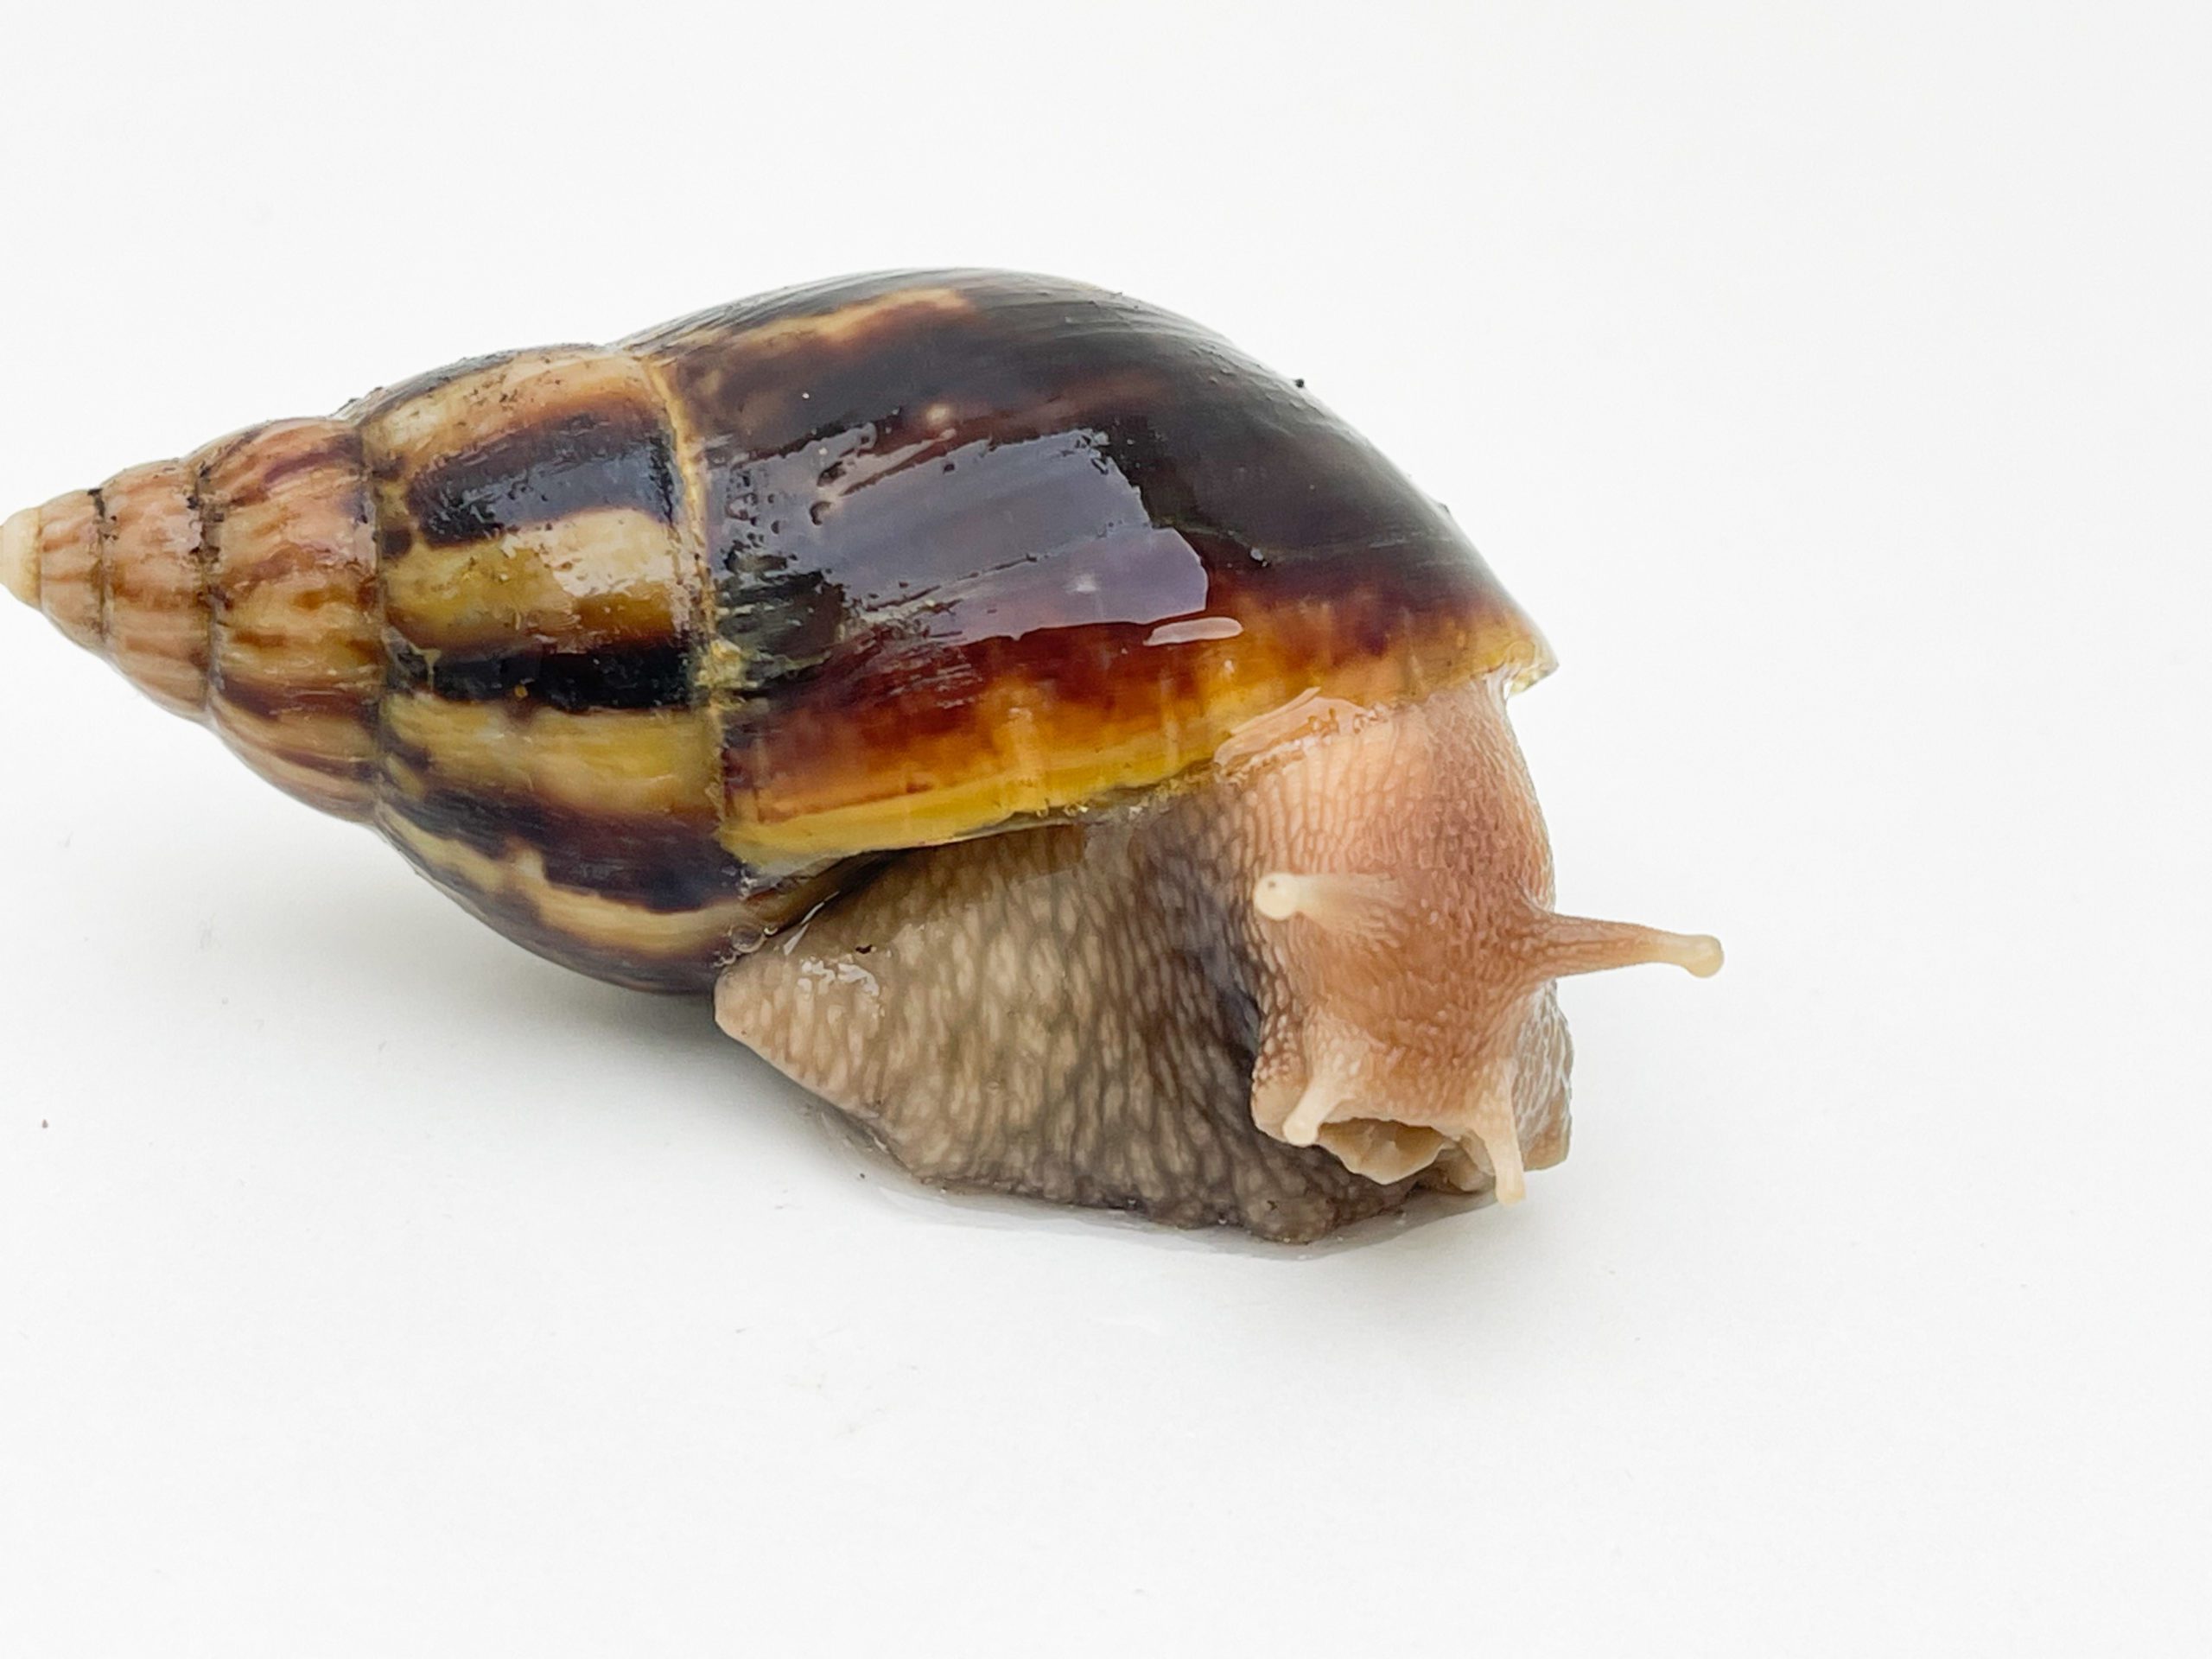 Giant African Land Snail 7-8cm *OFFER AVAILABLE*